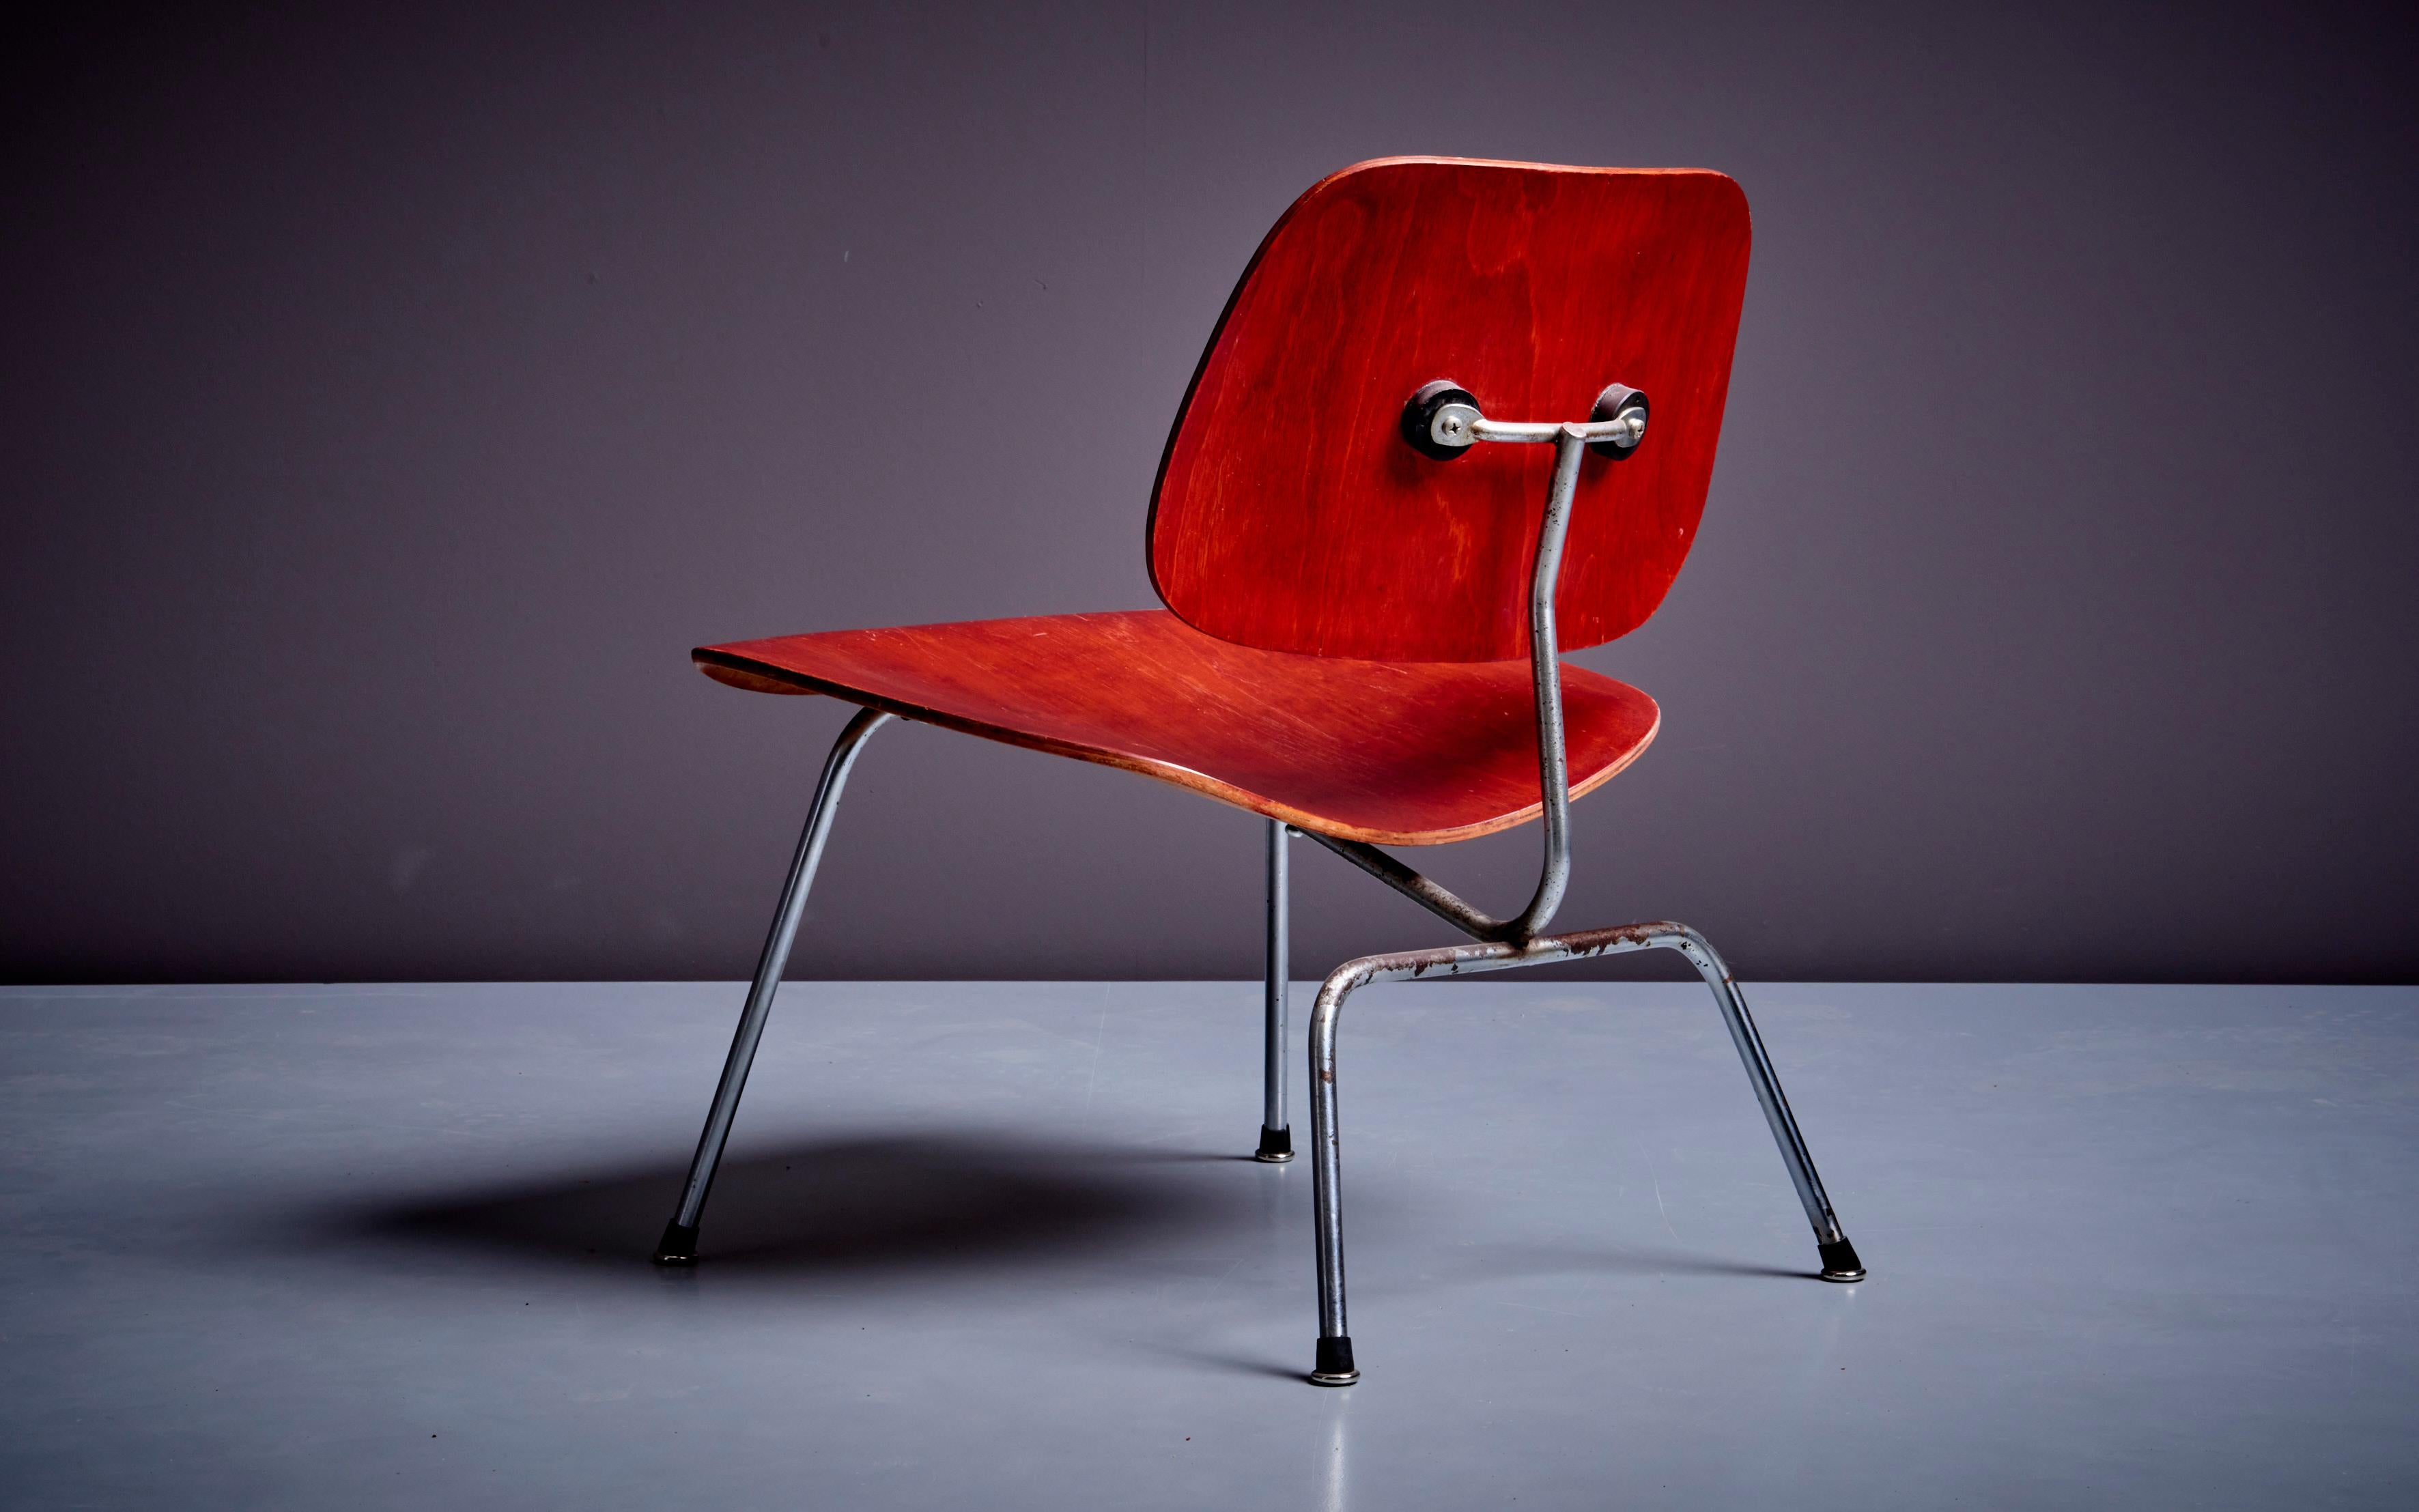 Metal Early LCM Chair in Rare Aniline Red by Charles Eames for Herman Miller